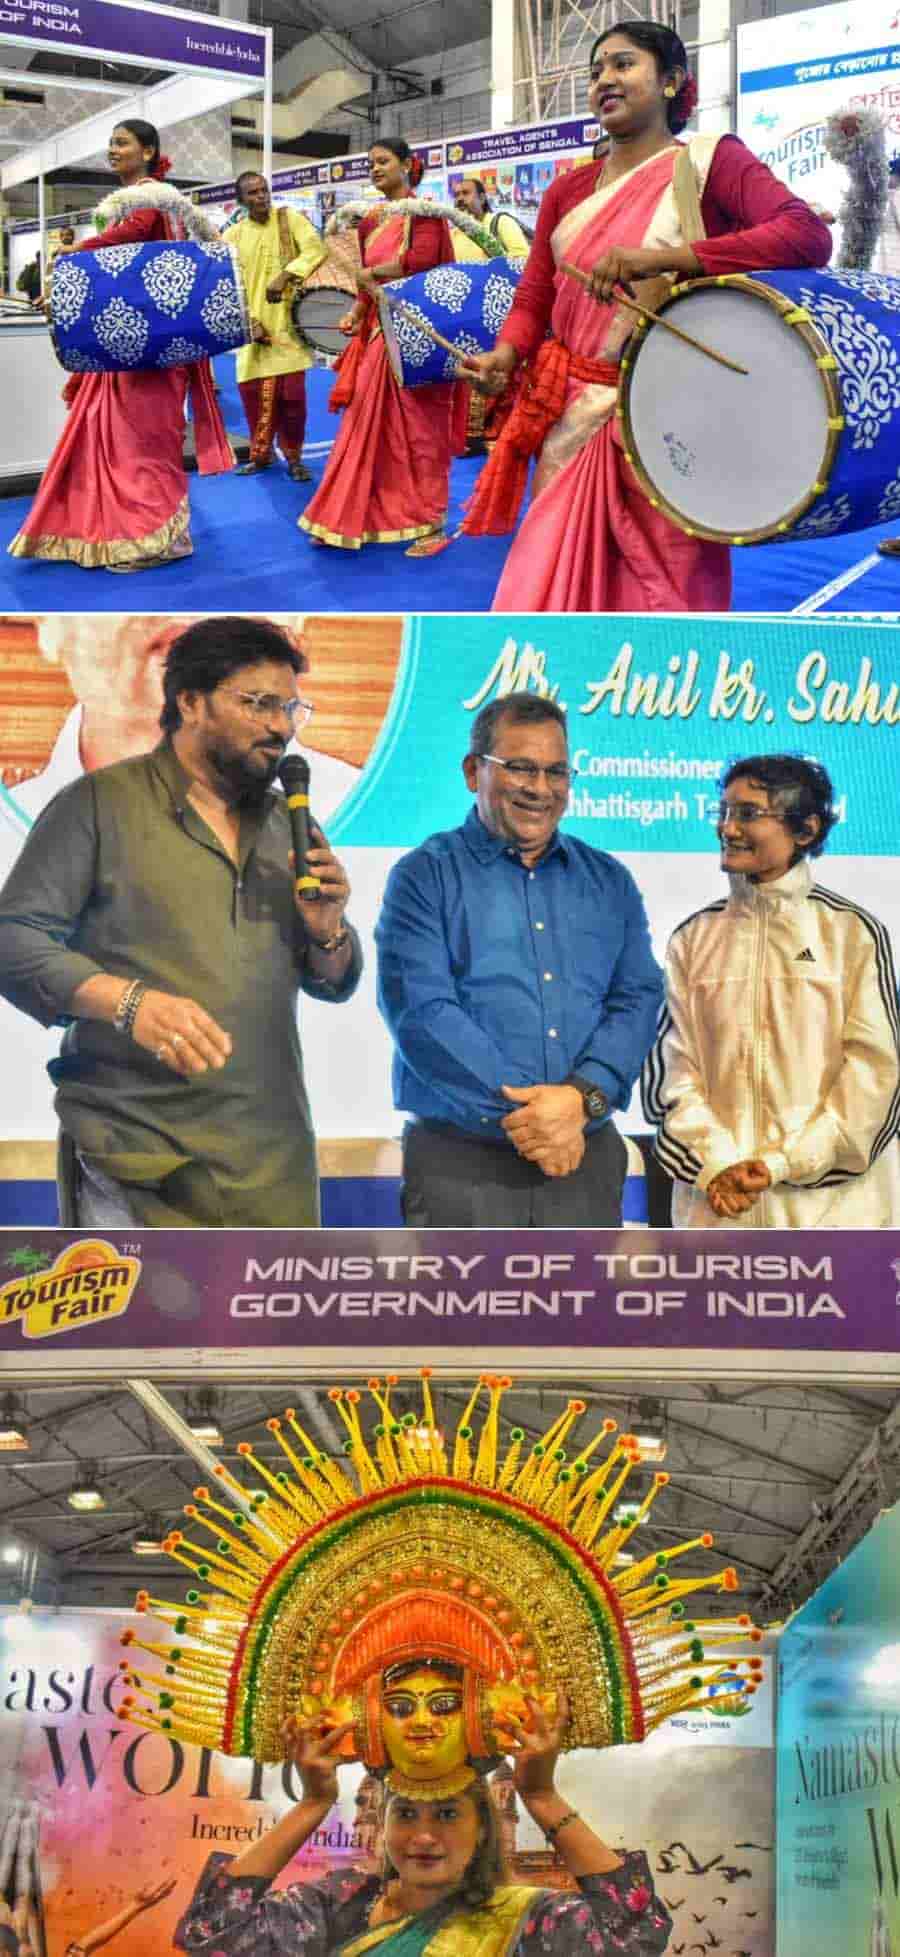 The three-day Kolkata Tourism Fair was inaugurated on Friday by Babul Supriyo, minister of tourism for West Bengal, at the Netaji Indoor Stadium. The fair will end on June 18 